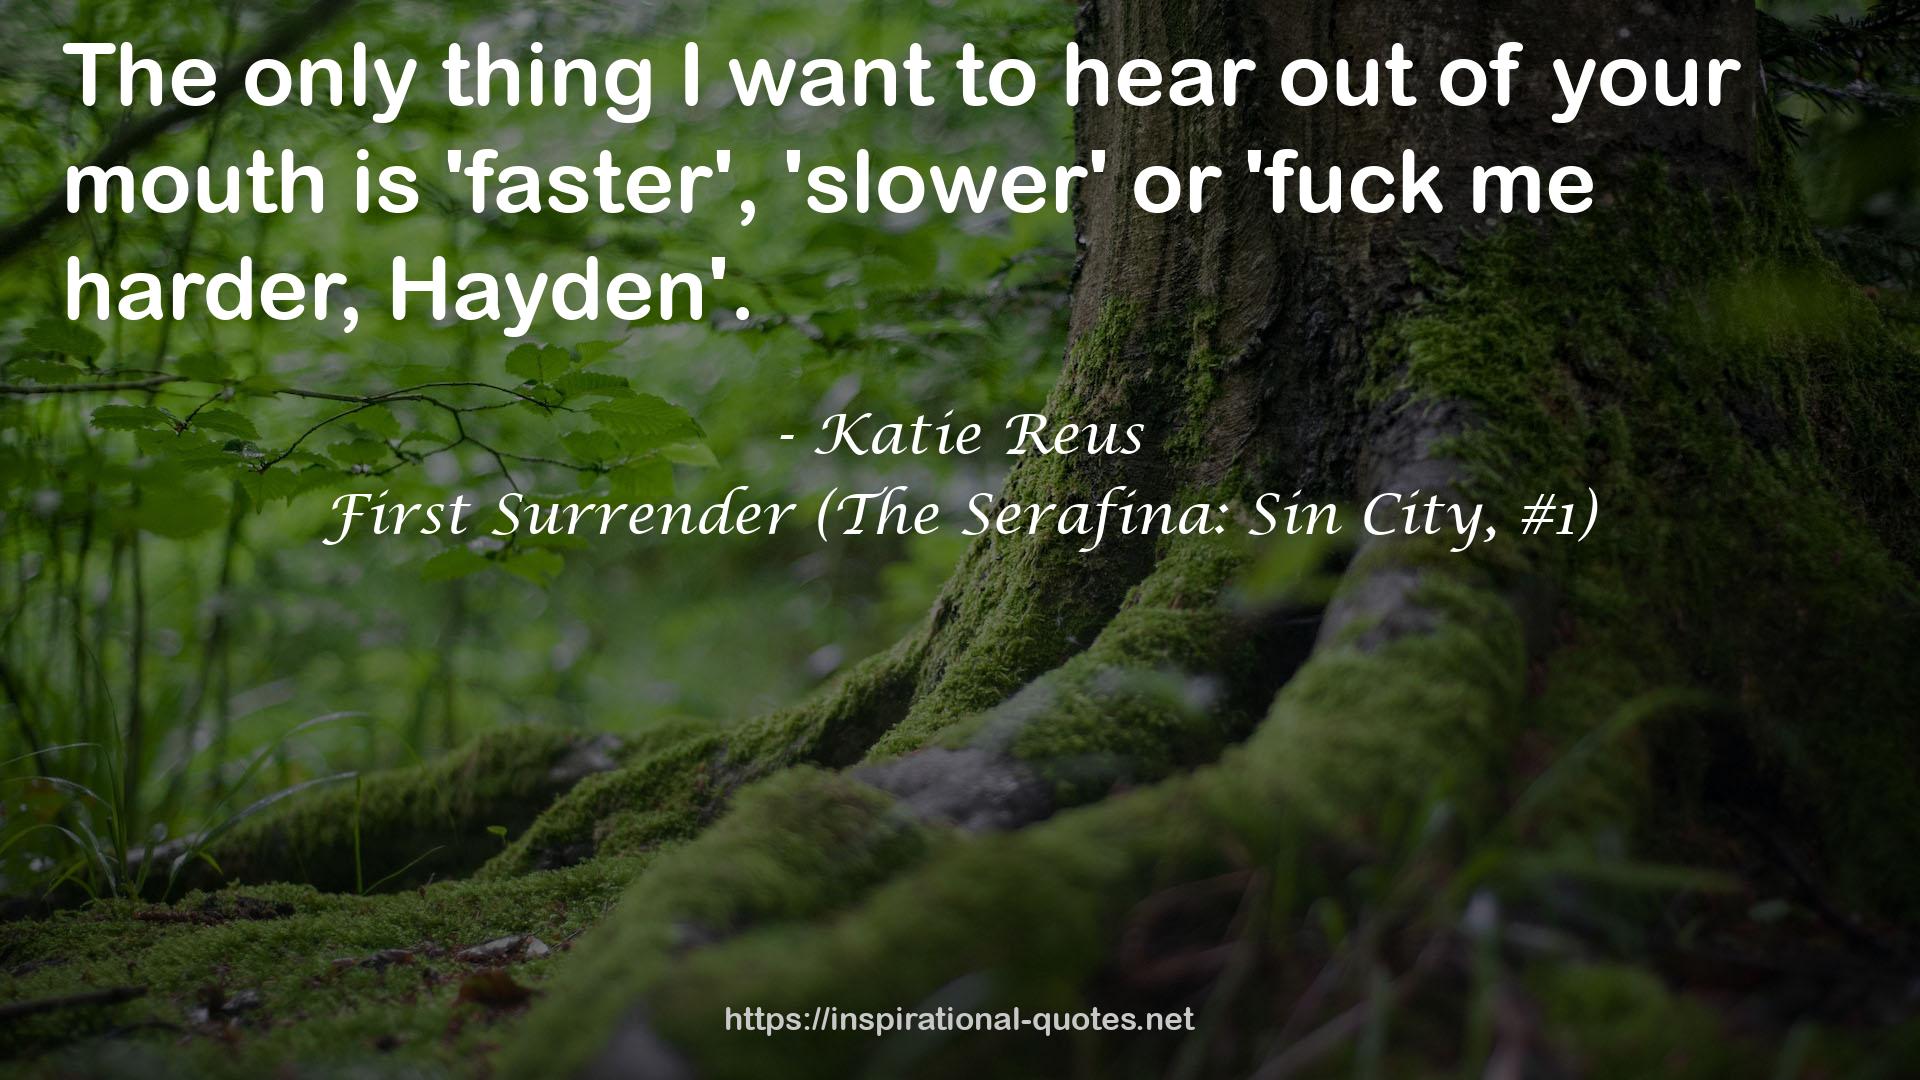 First Surrender (The Serafina: Sin City, #1) QUOTES